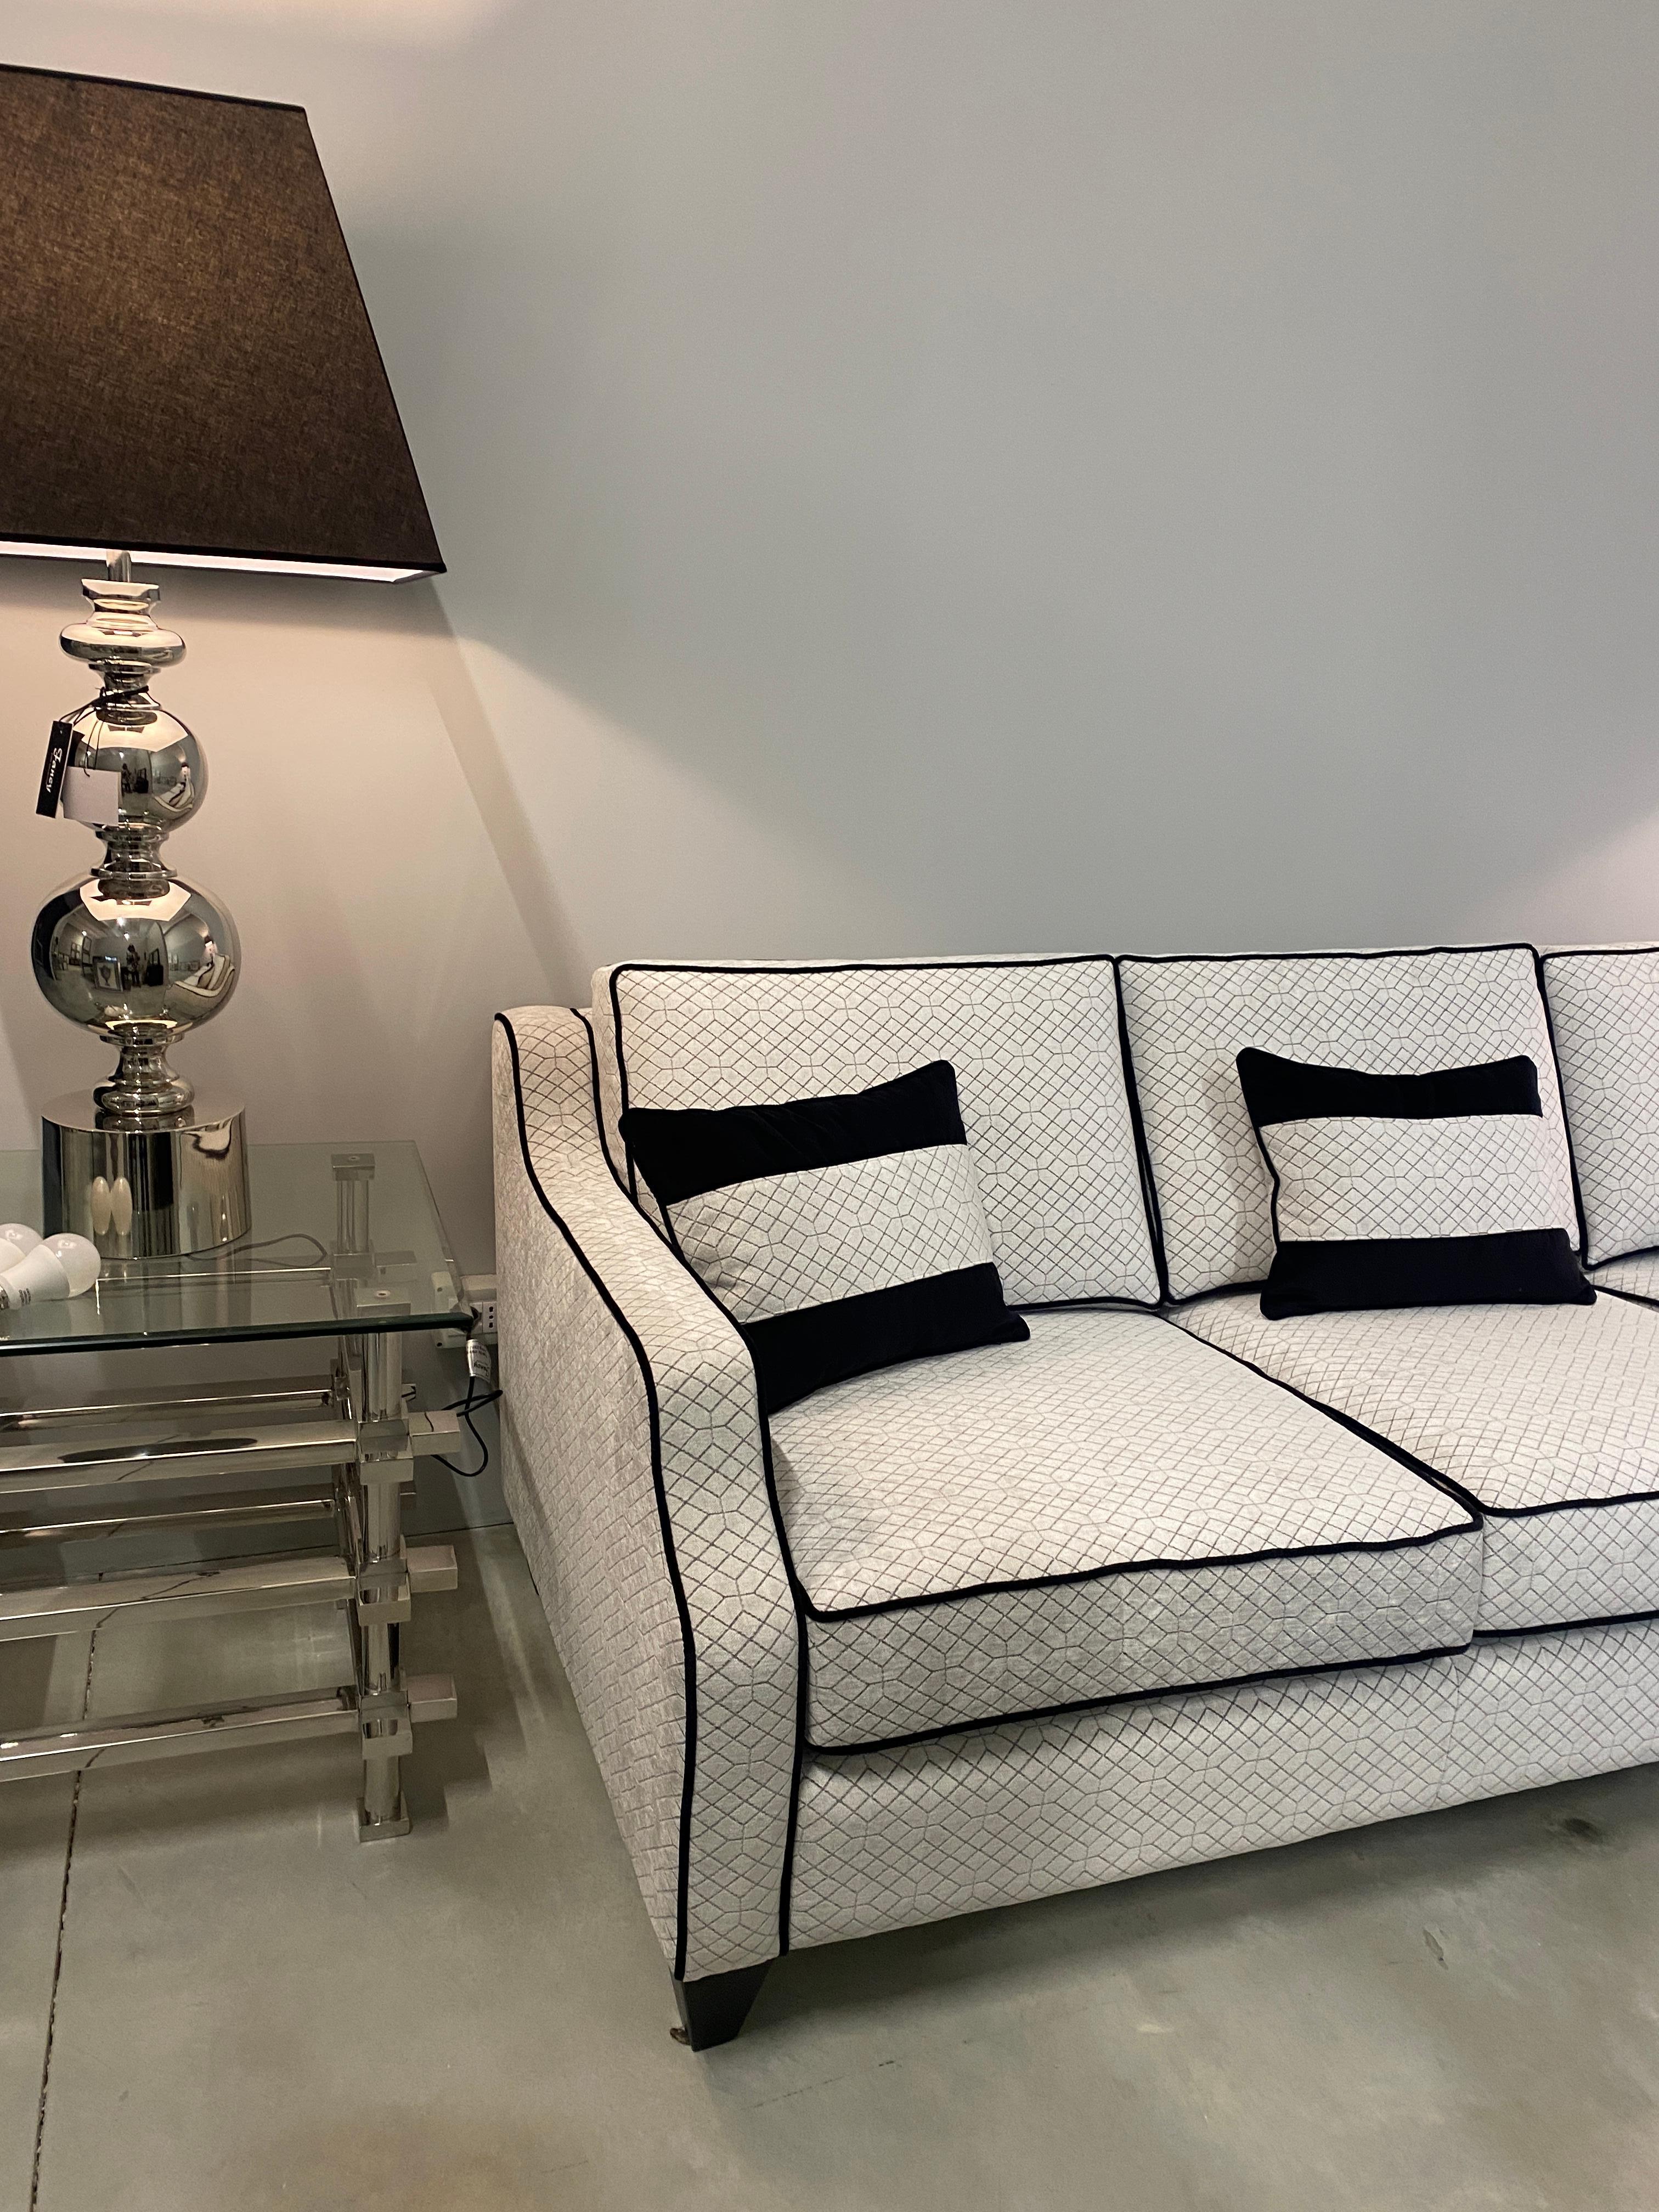 This beautiful three-seater sofa made with a handmade wooden inner structure and upholstered in a beautiful black and light grey velvet. Embellished with three back-protection cushions. The seat is divided by three large cushions and the pyramid